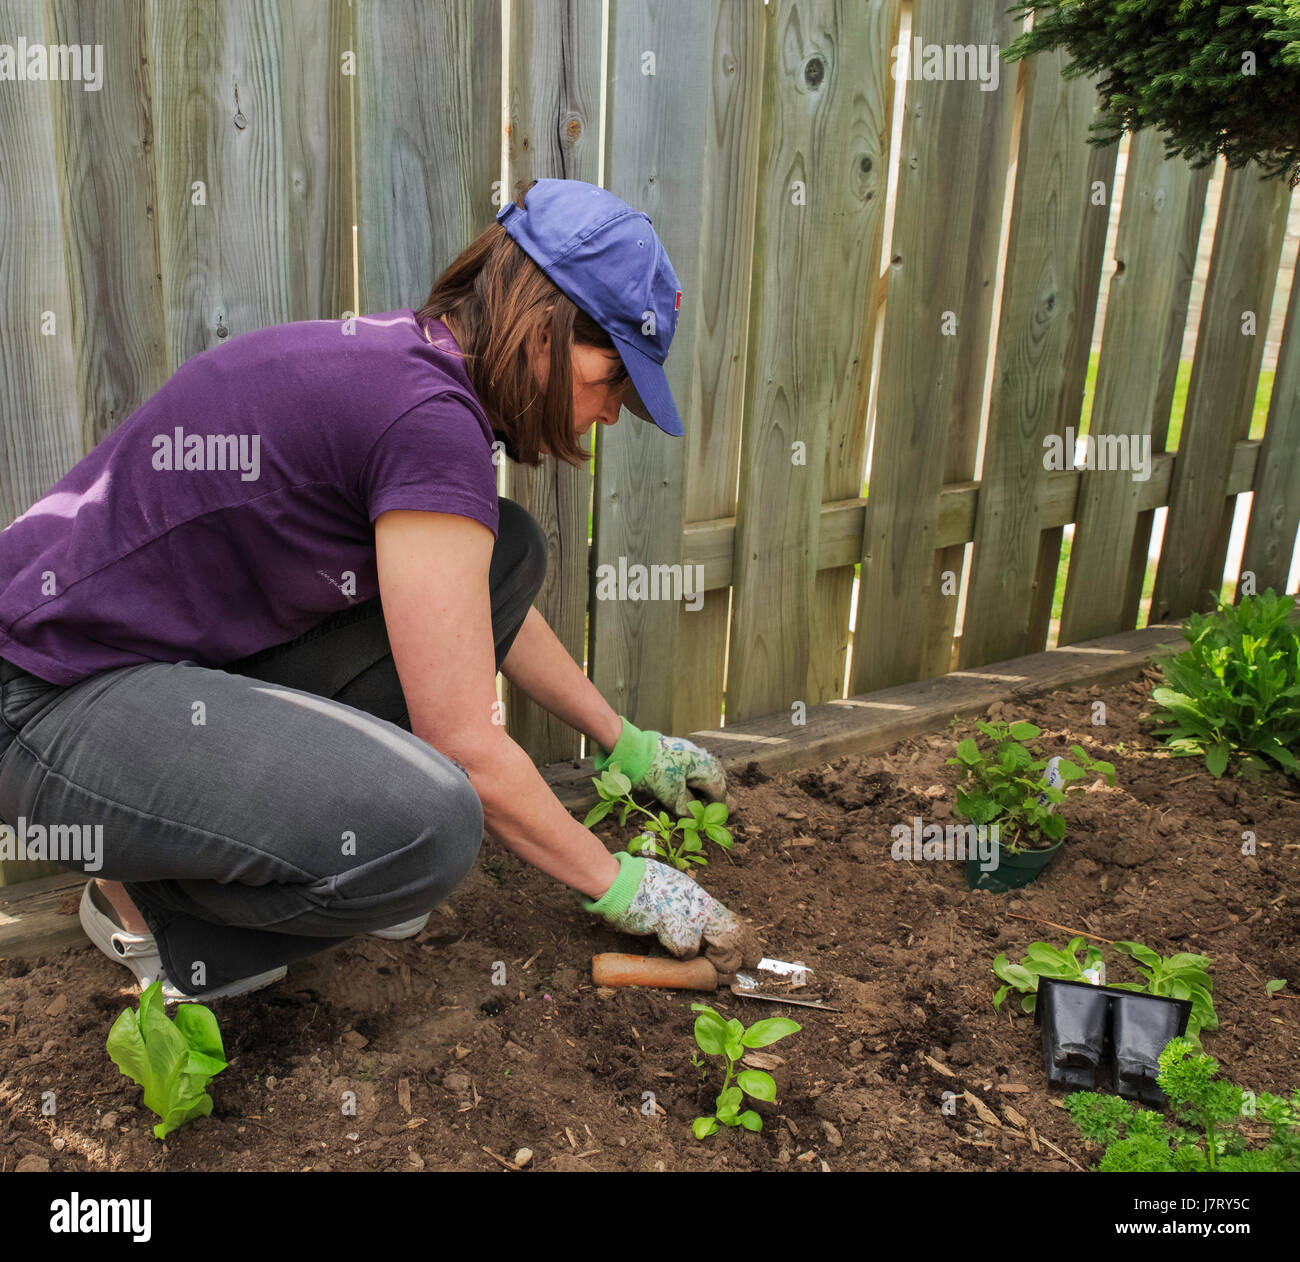 Woman is planting seedlings beside a fence in an urban garden, Ontario Canada Stock Photo